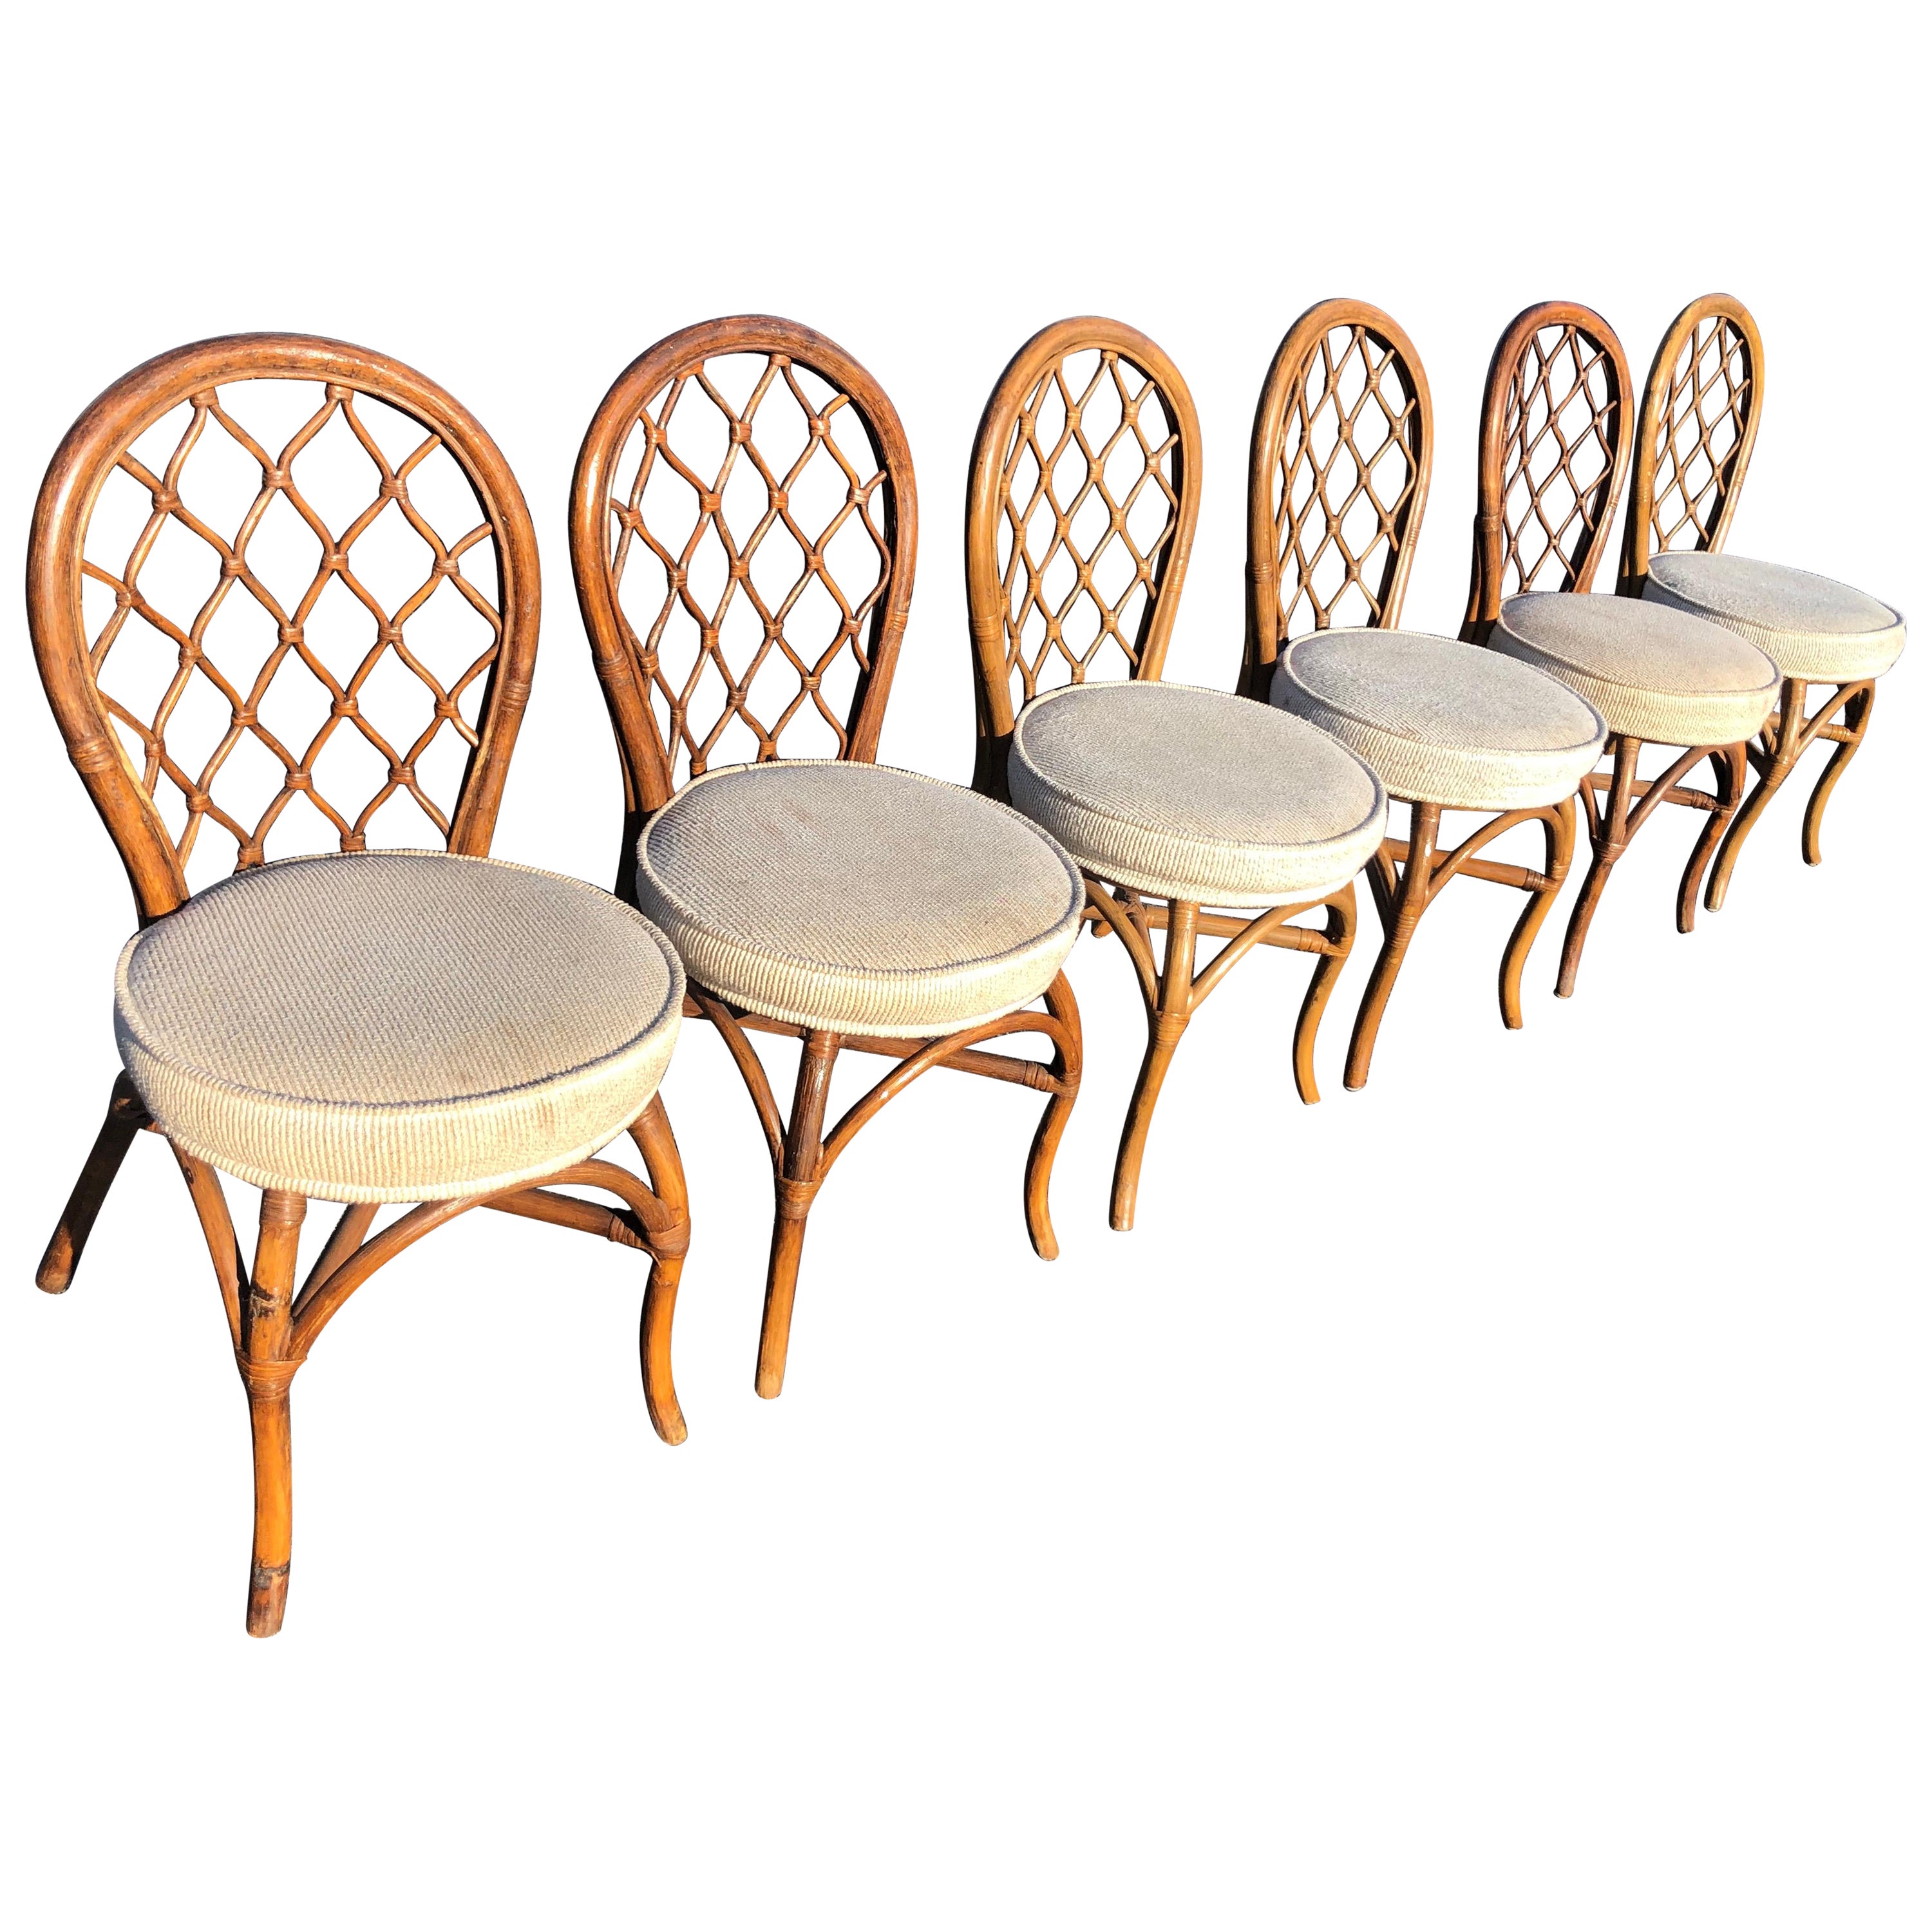 Set of Six Bamboo Chairs